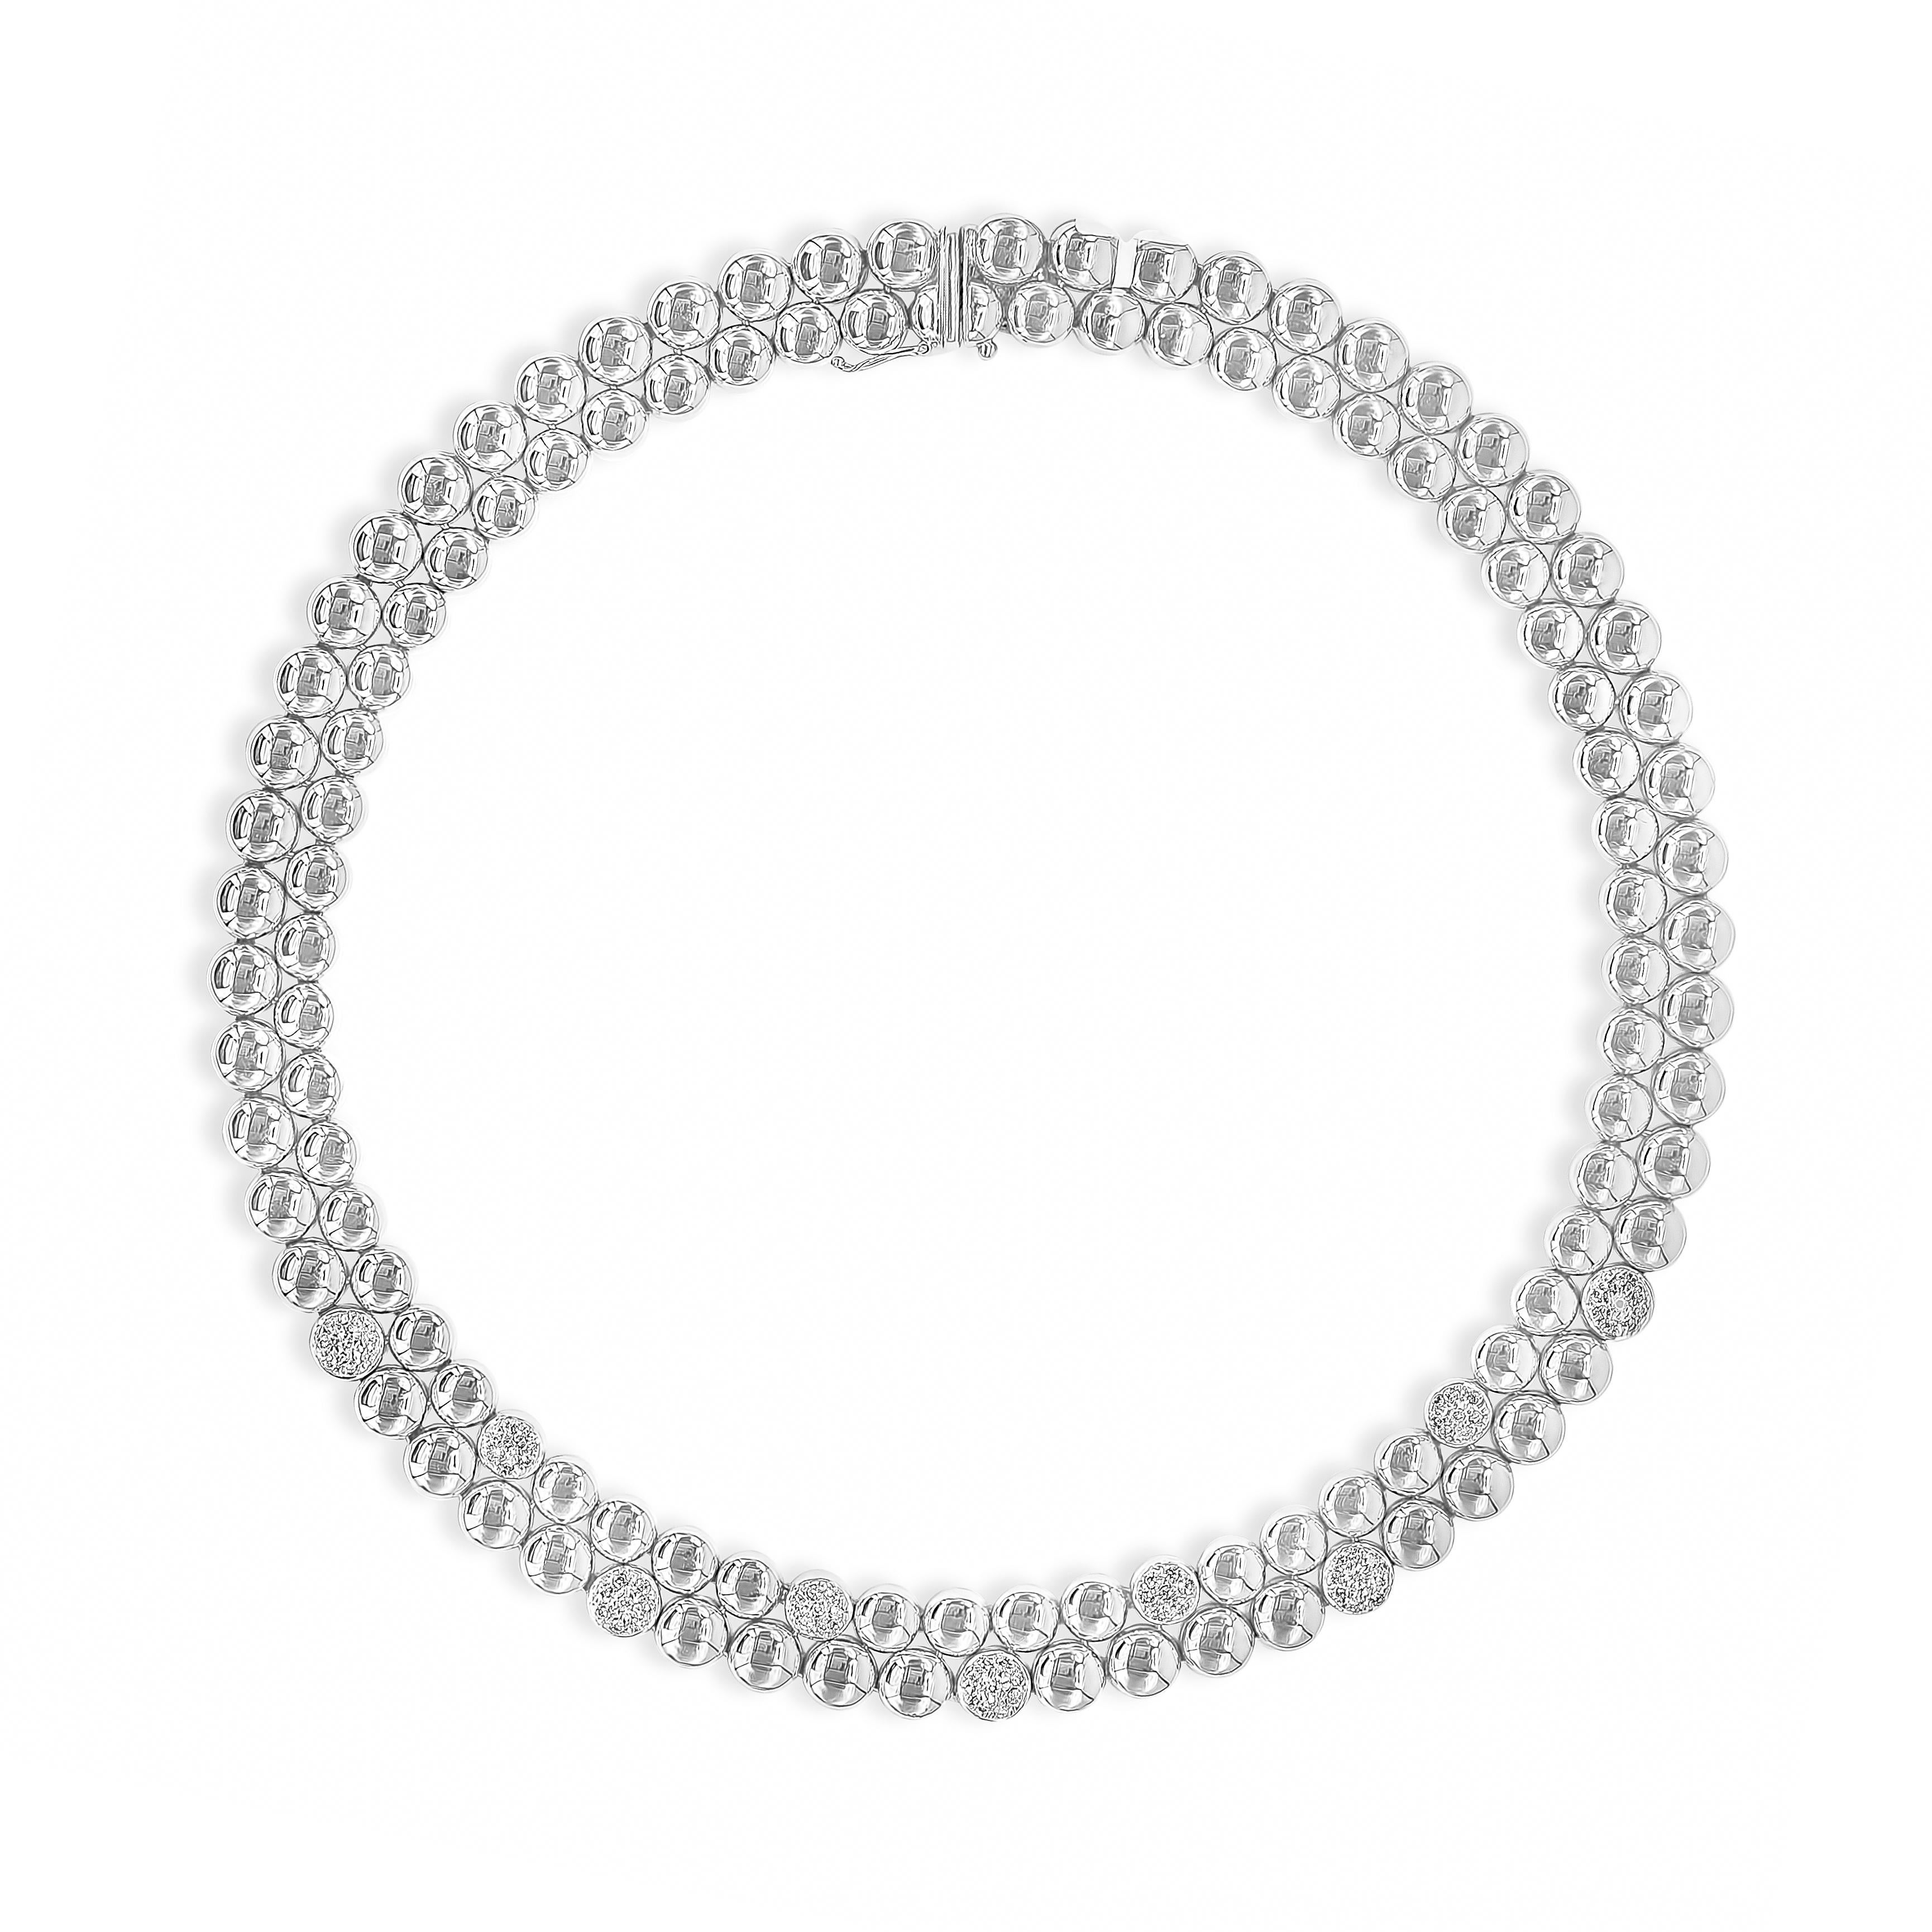 A stylish necklace showcasing two rows of 18K white gold balls, accented with round brilliant diamonds. Diamonds weigh 1.06 carats total, G color and VS in clarity. Weighing 66.57 grams, 15 inches in length and made in white gold.